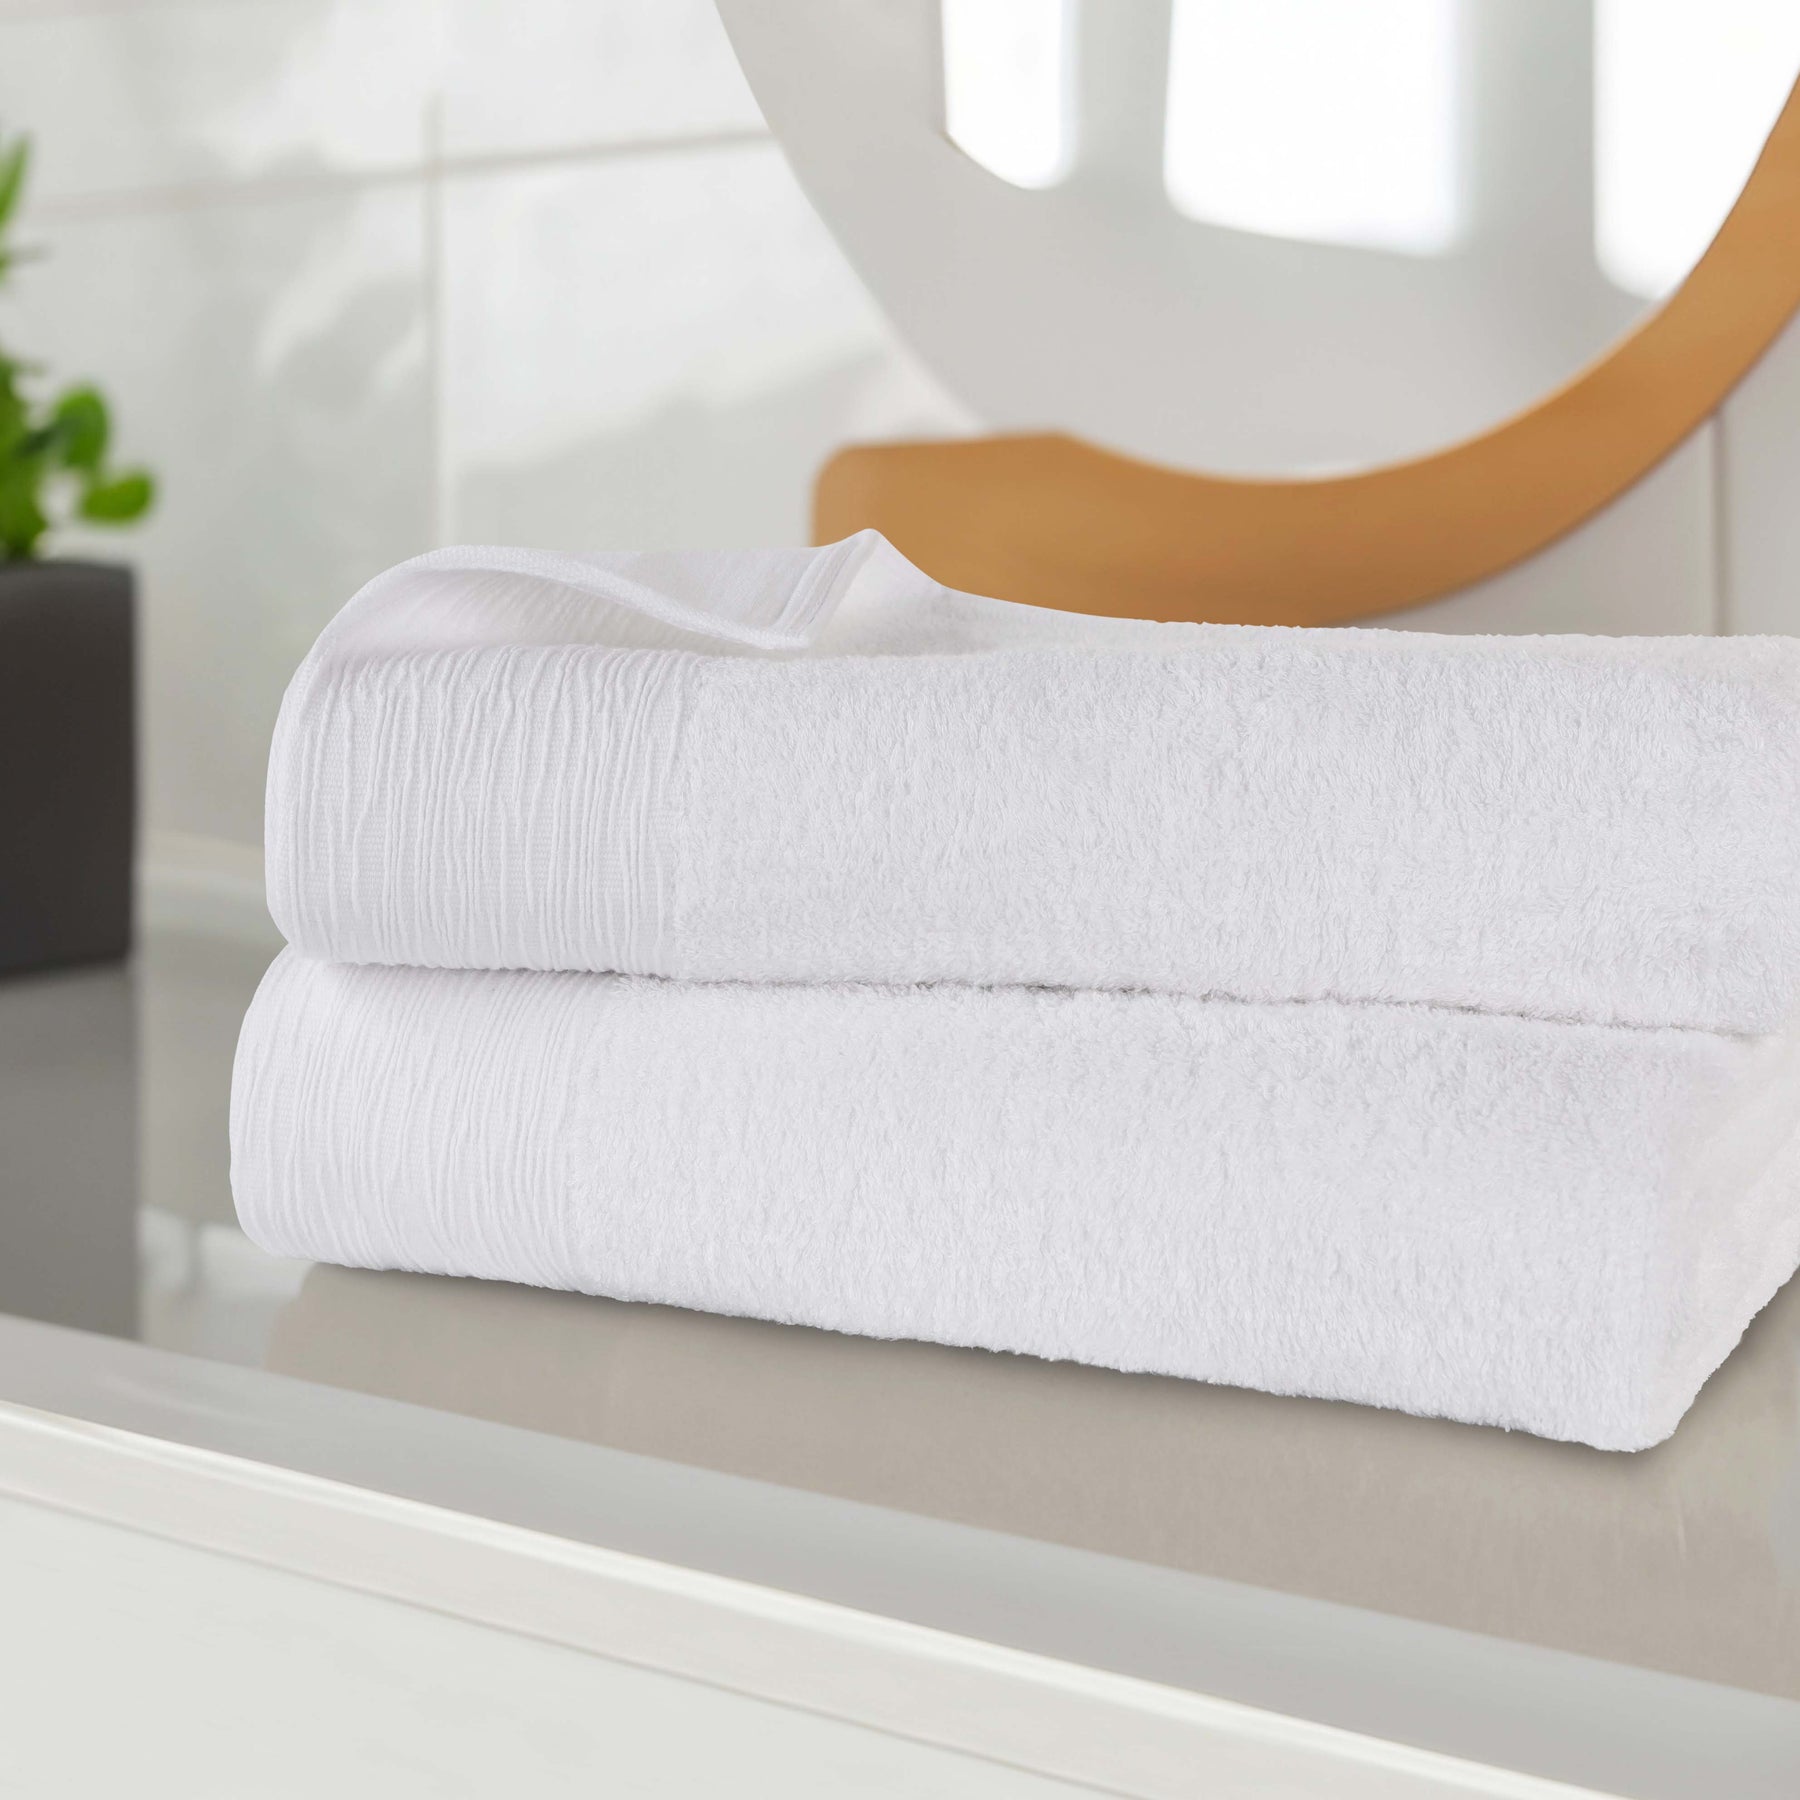 Rayon from Bamboo Eco-Friendly Fluffy Soft Solid Bath Sheet - White